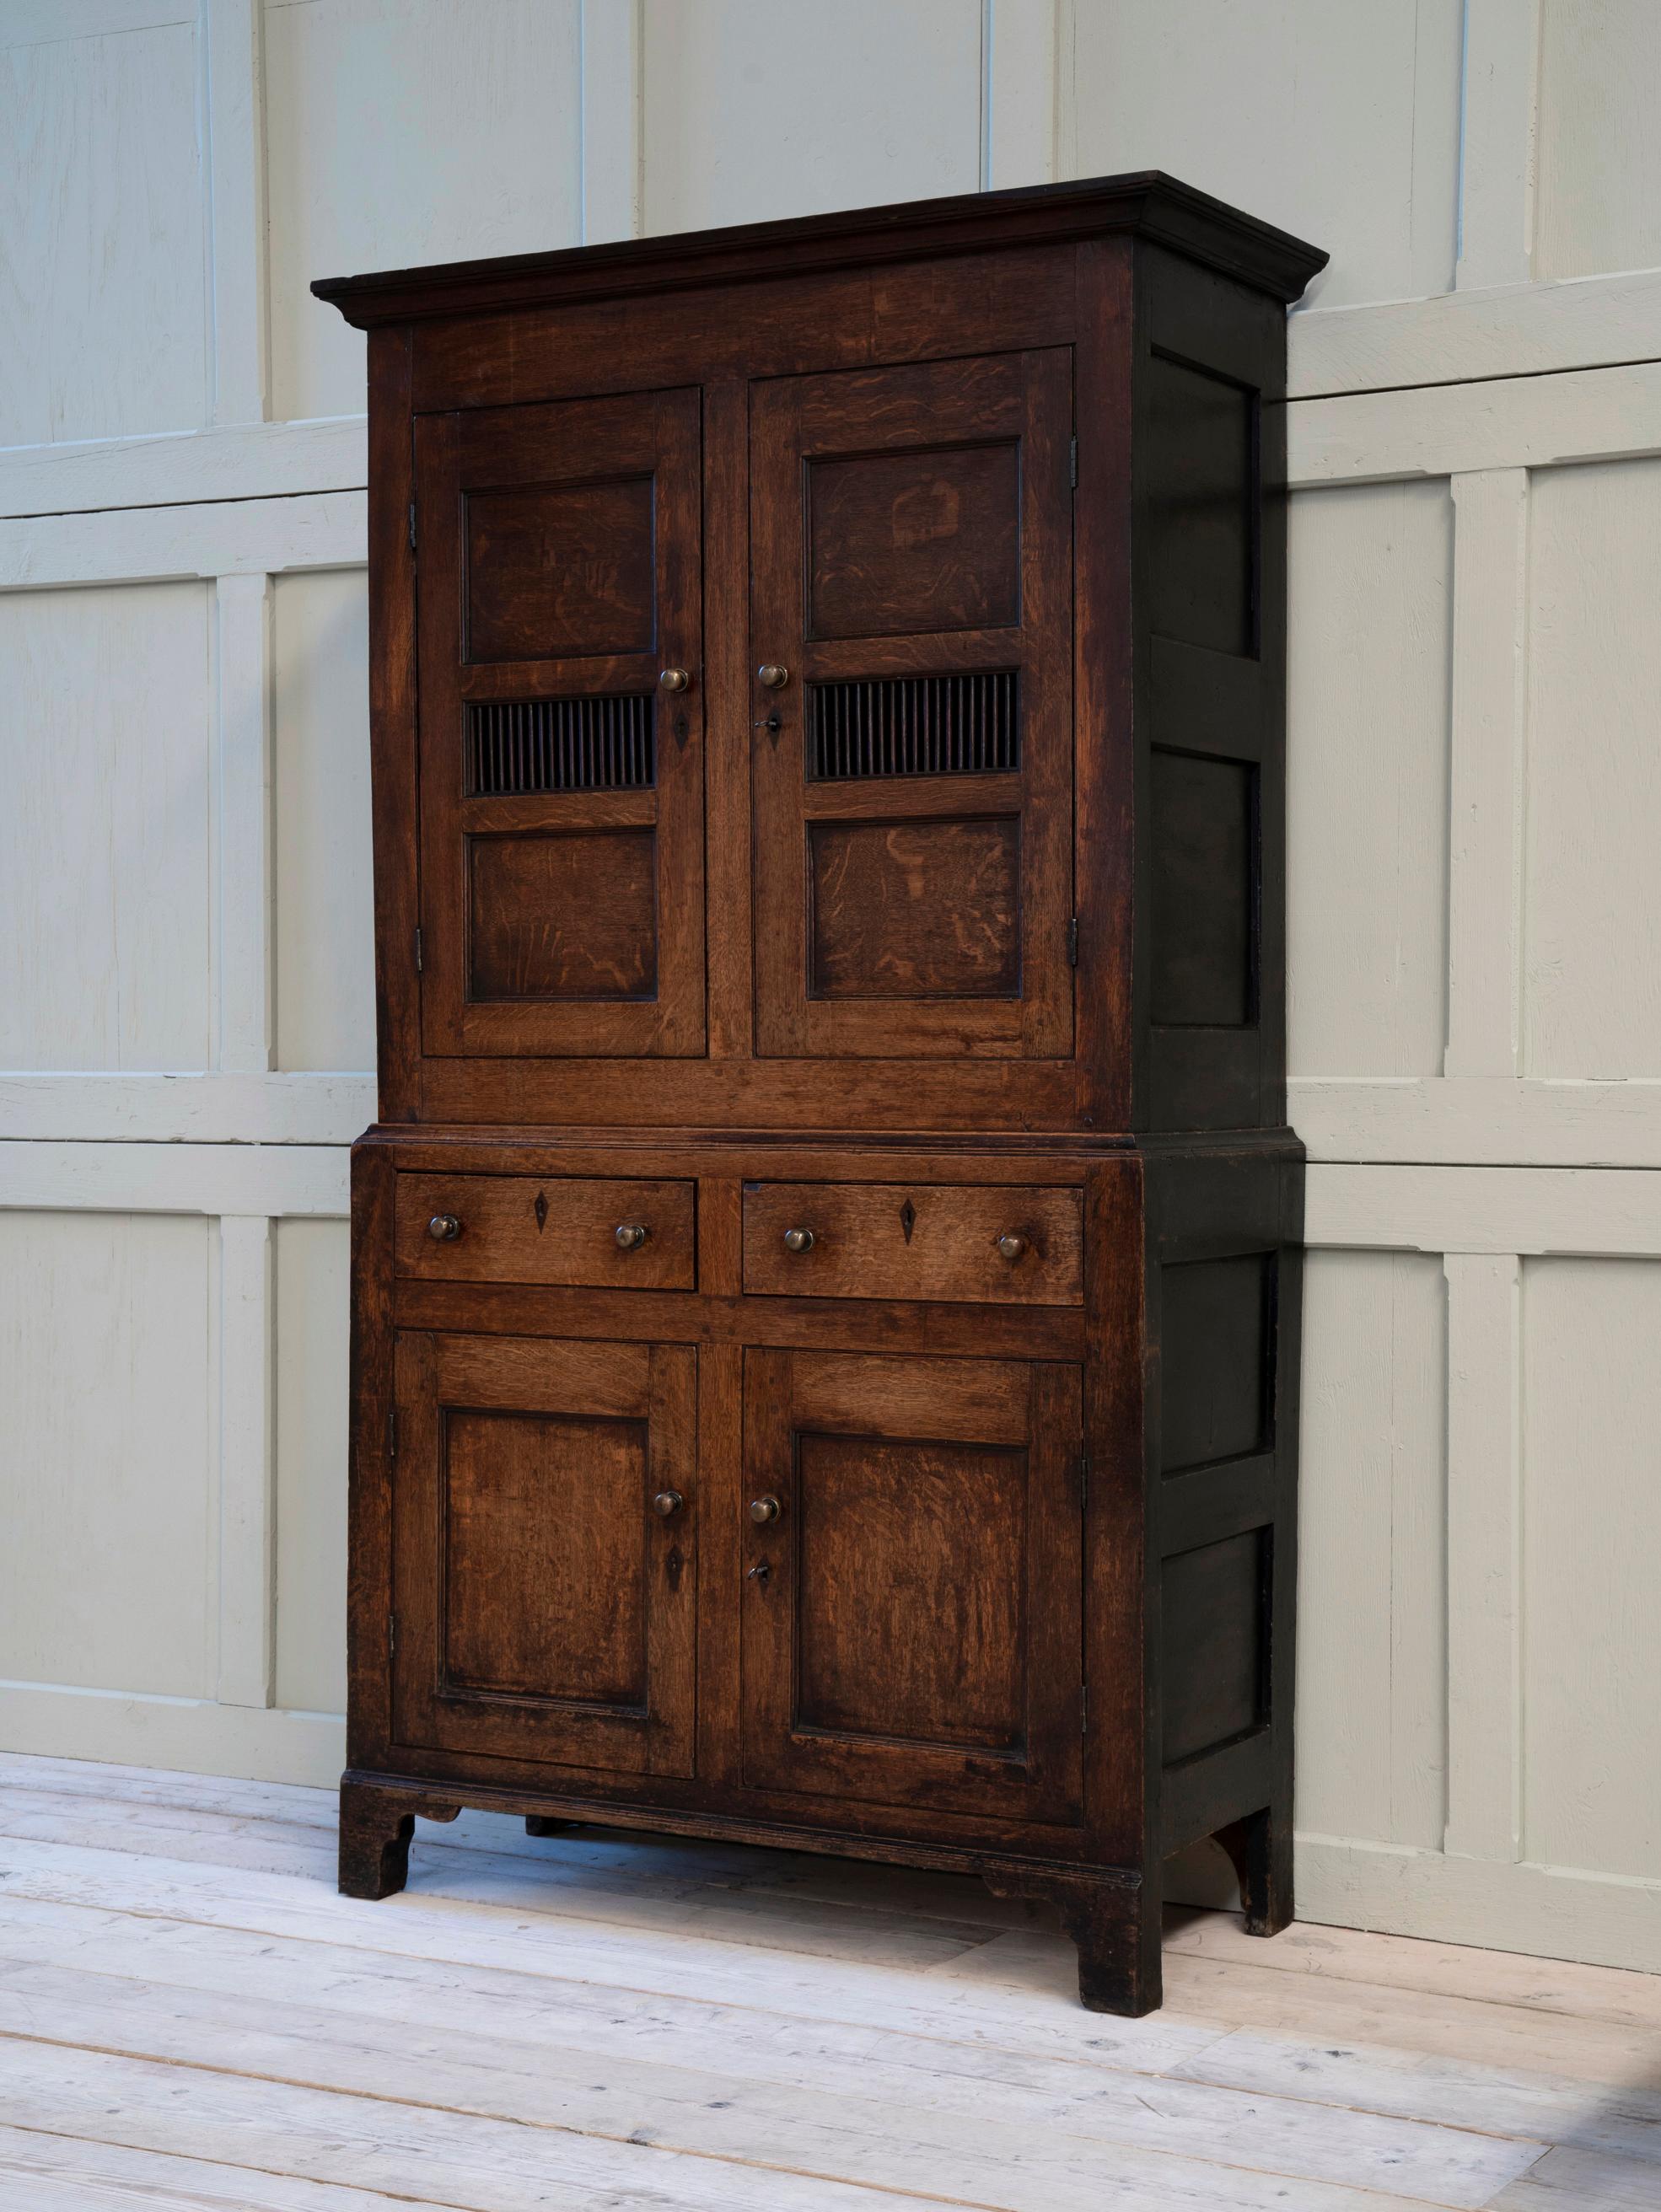 An early 19th century oak and pine “bread and cheese” cupboard, or as they are referred to in Wales a “Cwpwrdd Bara Caws”.

The oak facade with painted pine returns, raised on bracket feet with brass handles.

The most original example we have